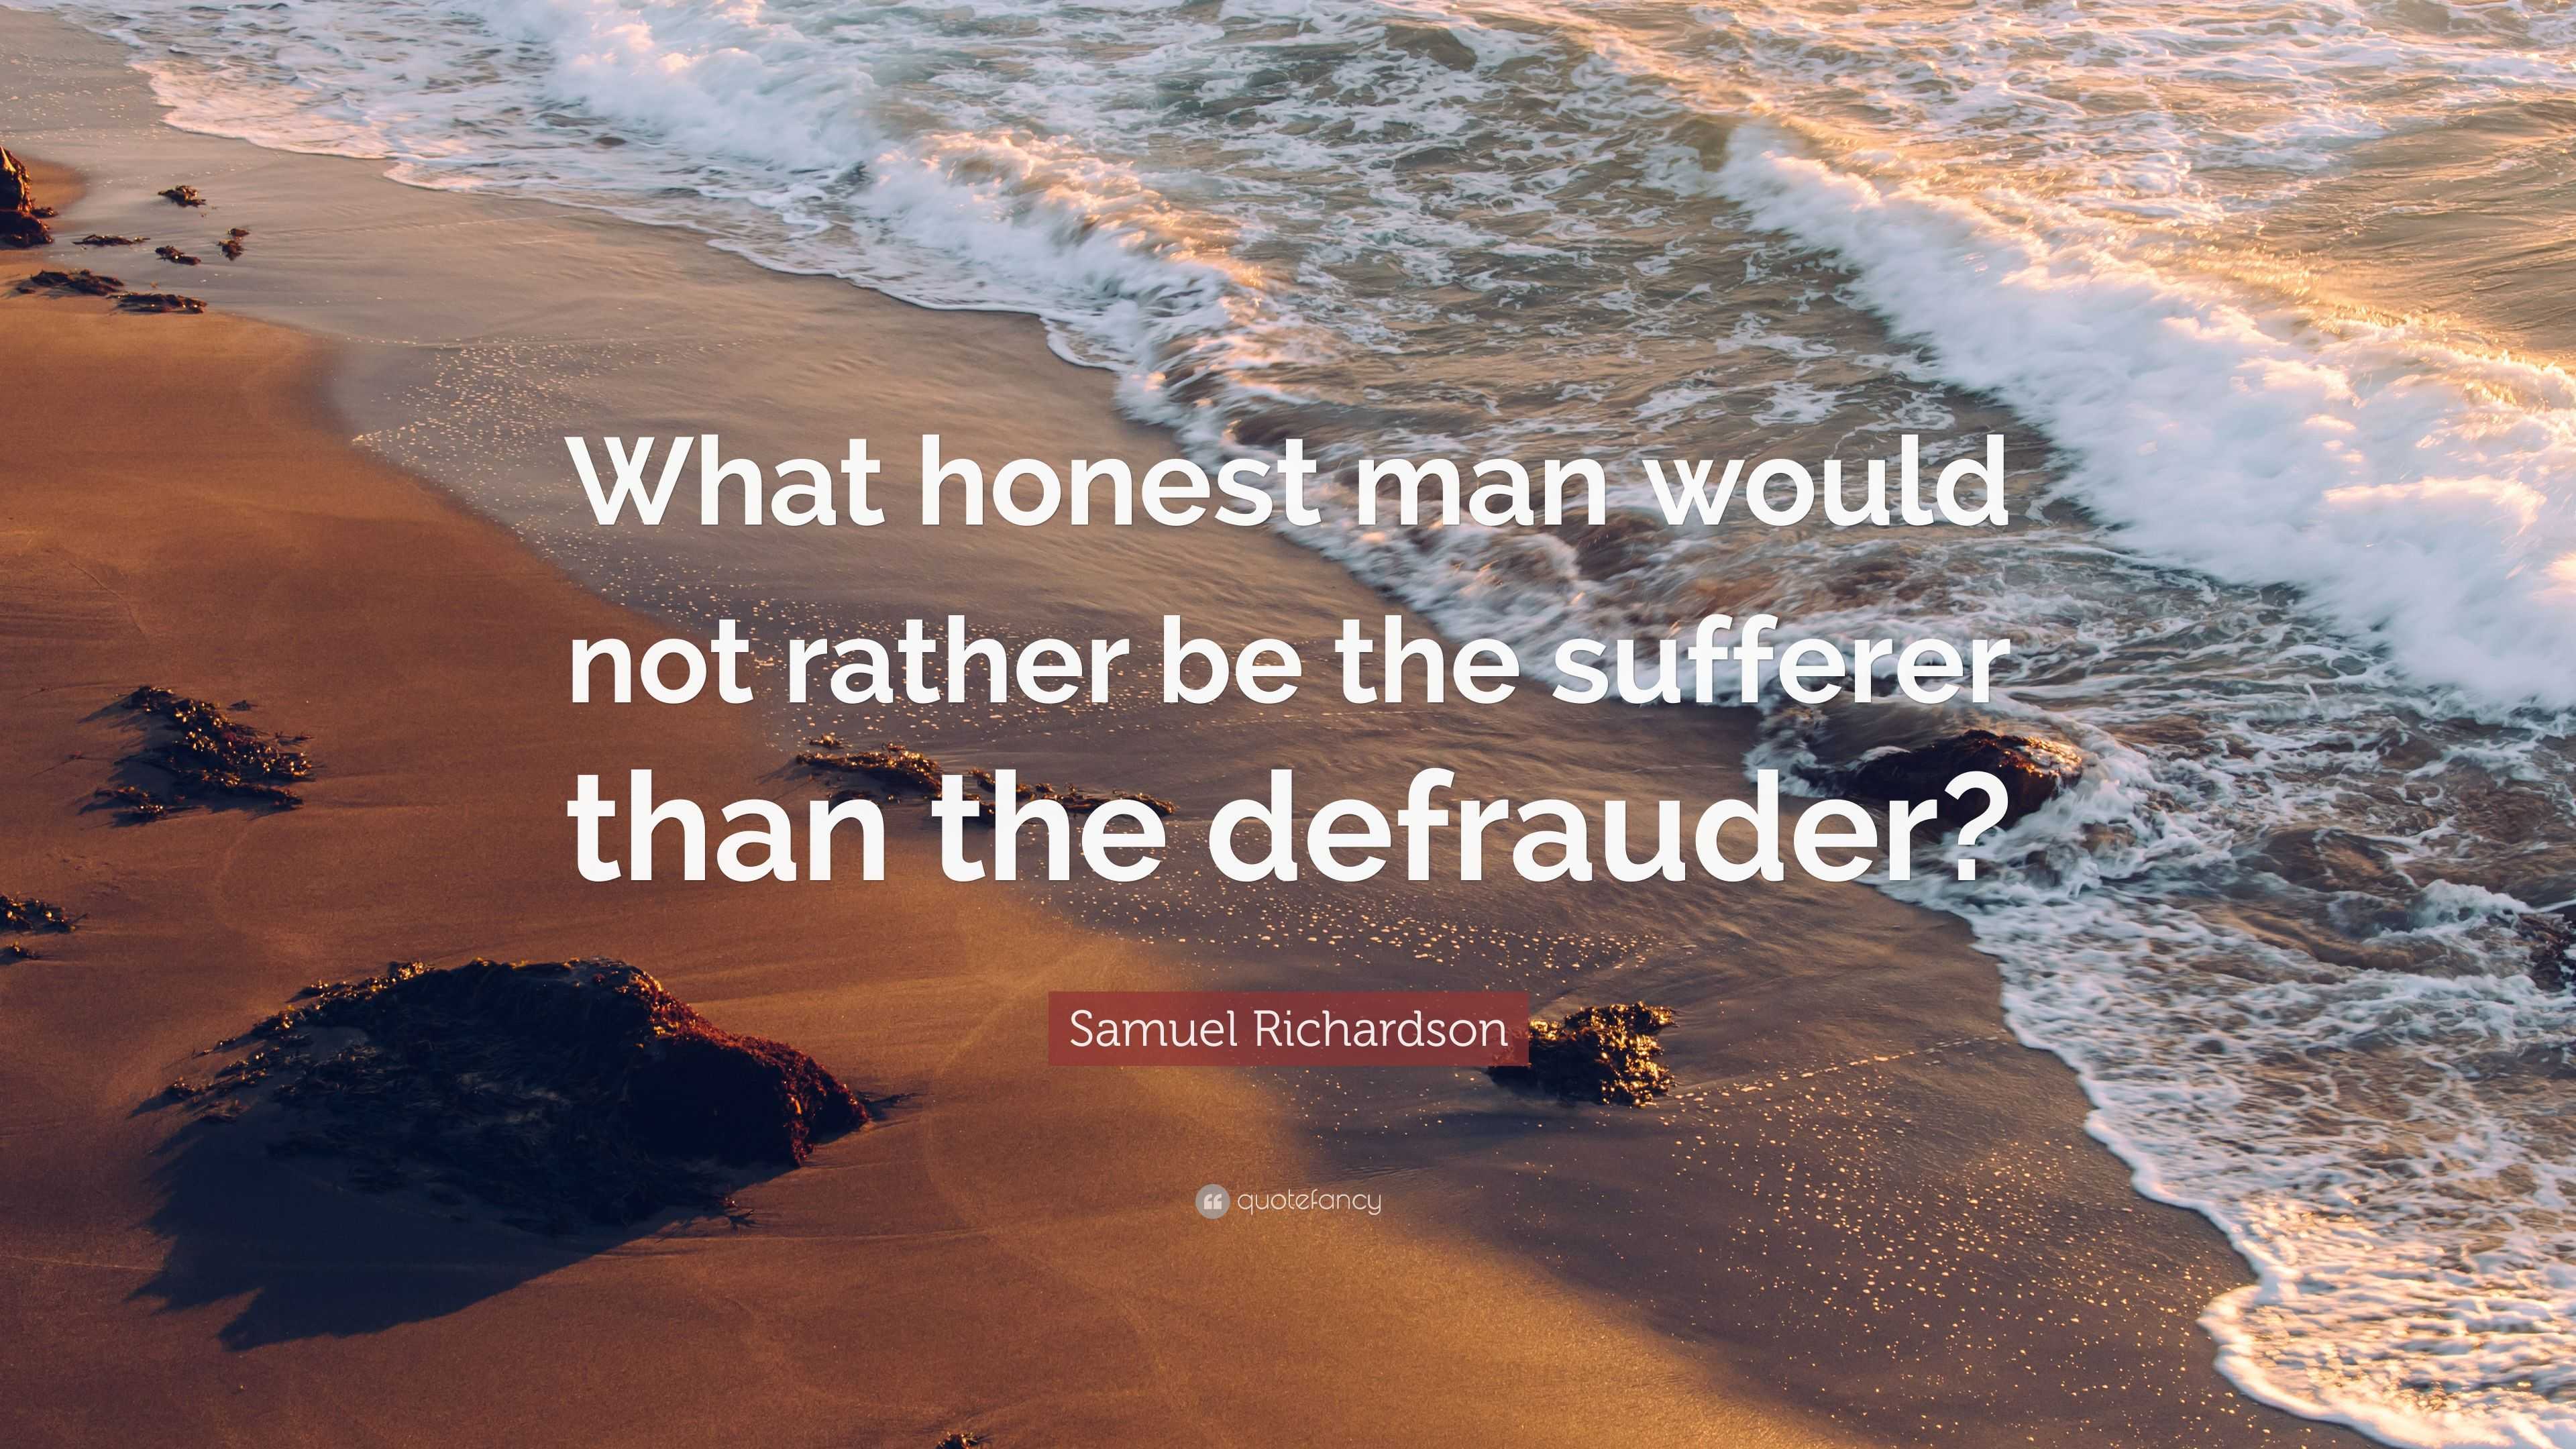 Samuel Richardson Quote “what Honest Man Would Not Rather Be The Sufferer Than The Defrauder” 